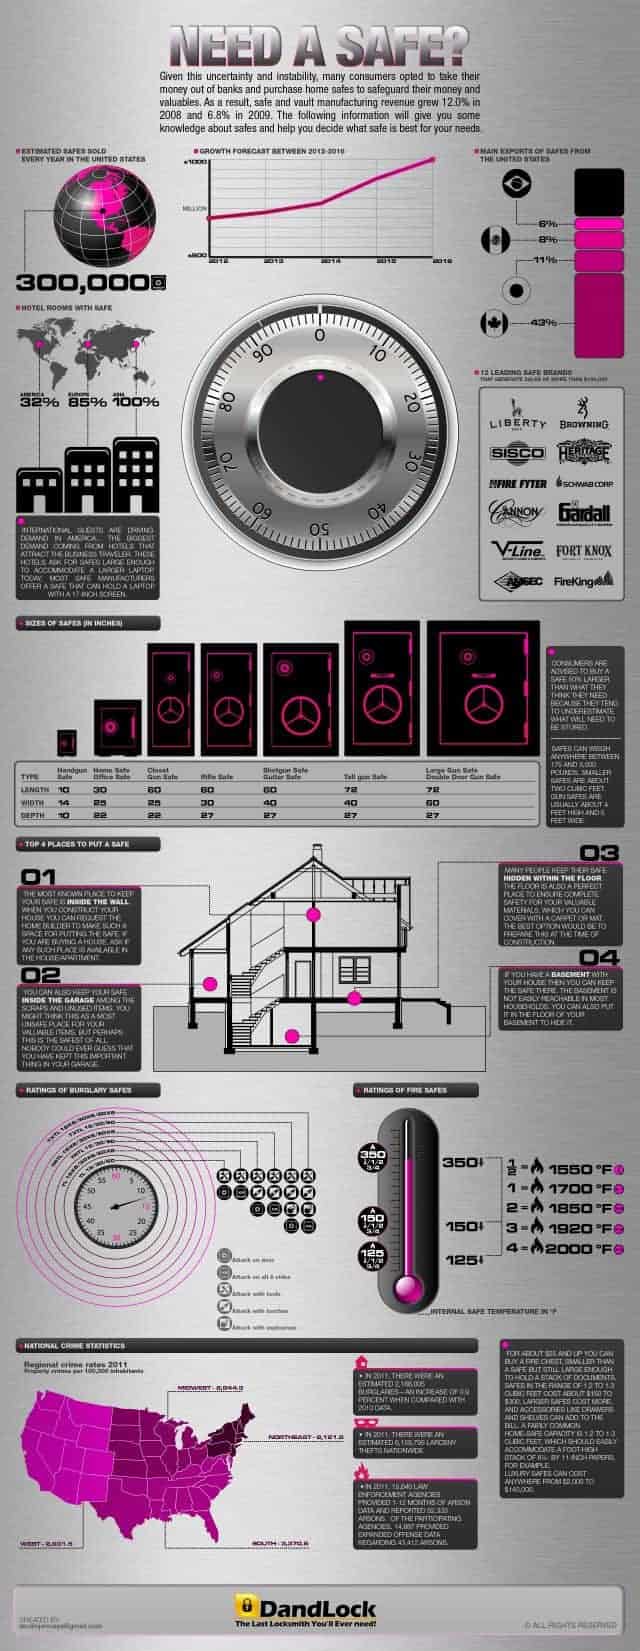 http://dailyinfographic.com/wp-content/uploads/2013/01/NEED-A-SAFE_INFOGRAPHIC-640x1651.jpg